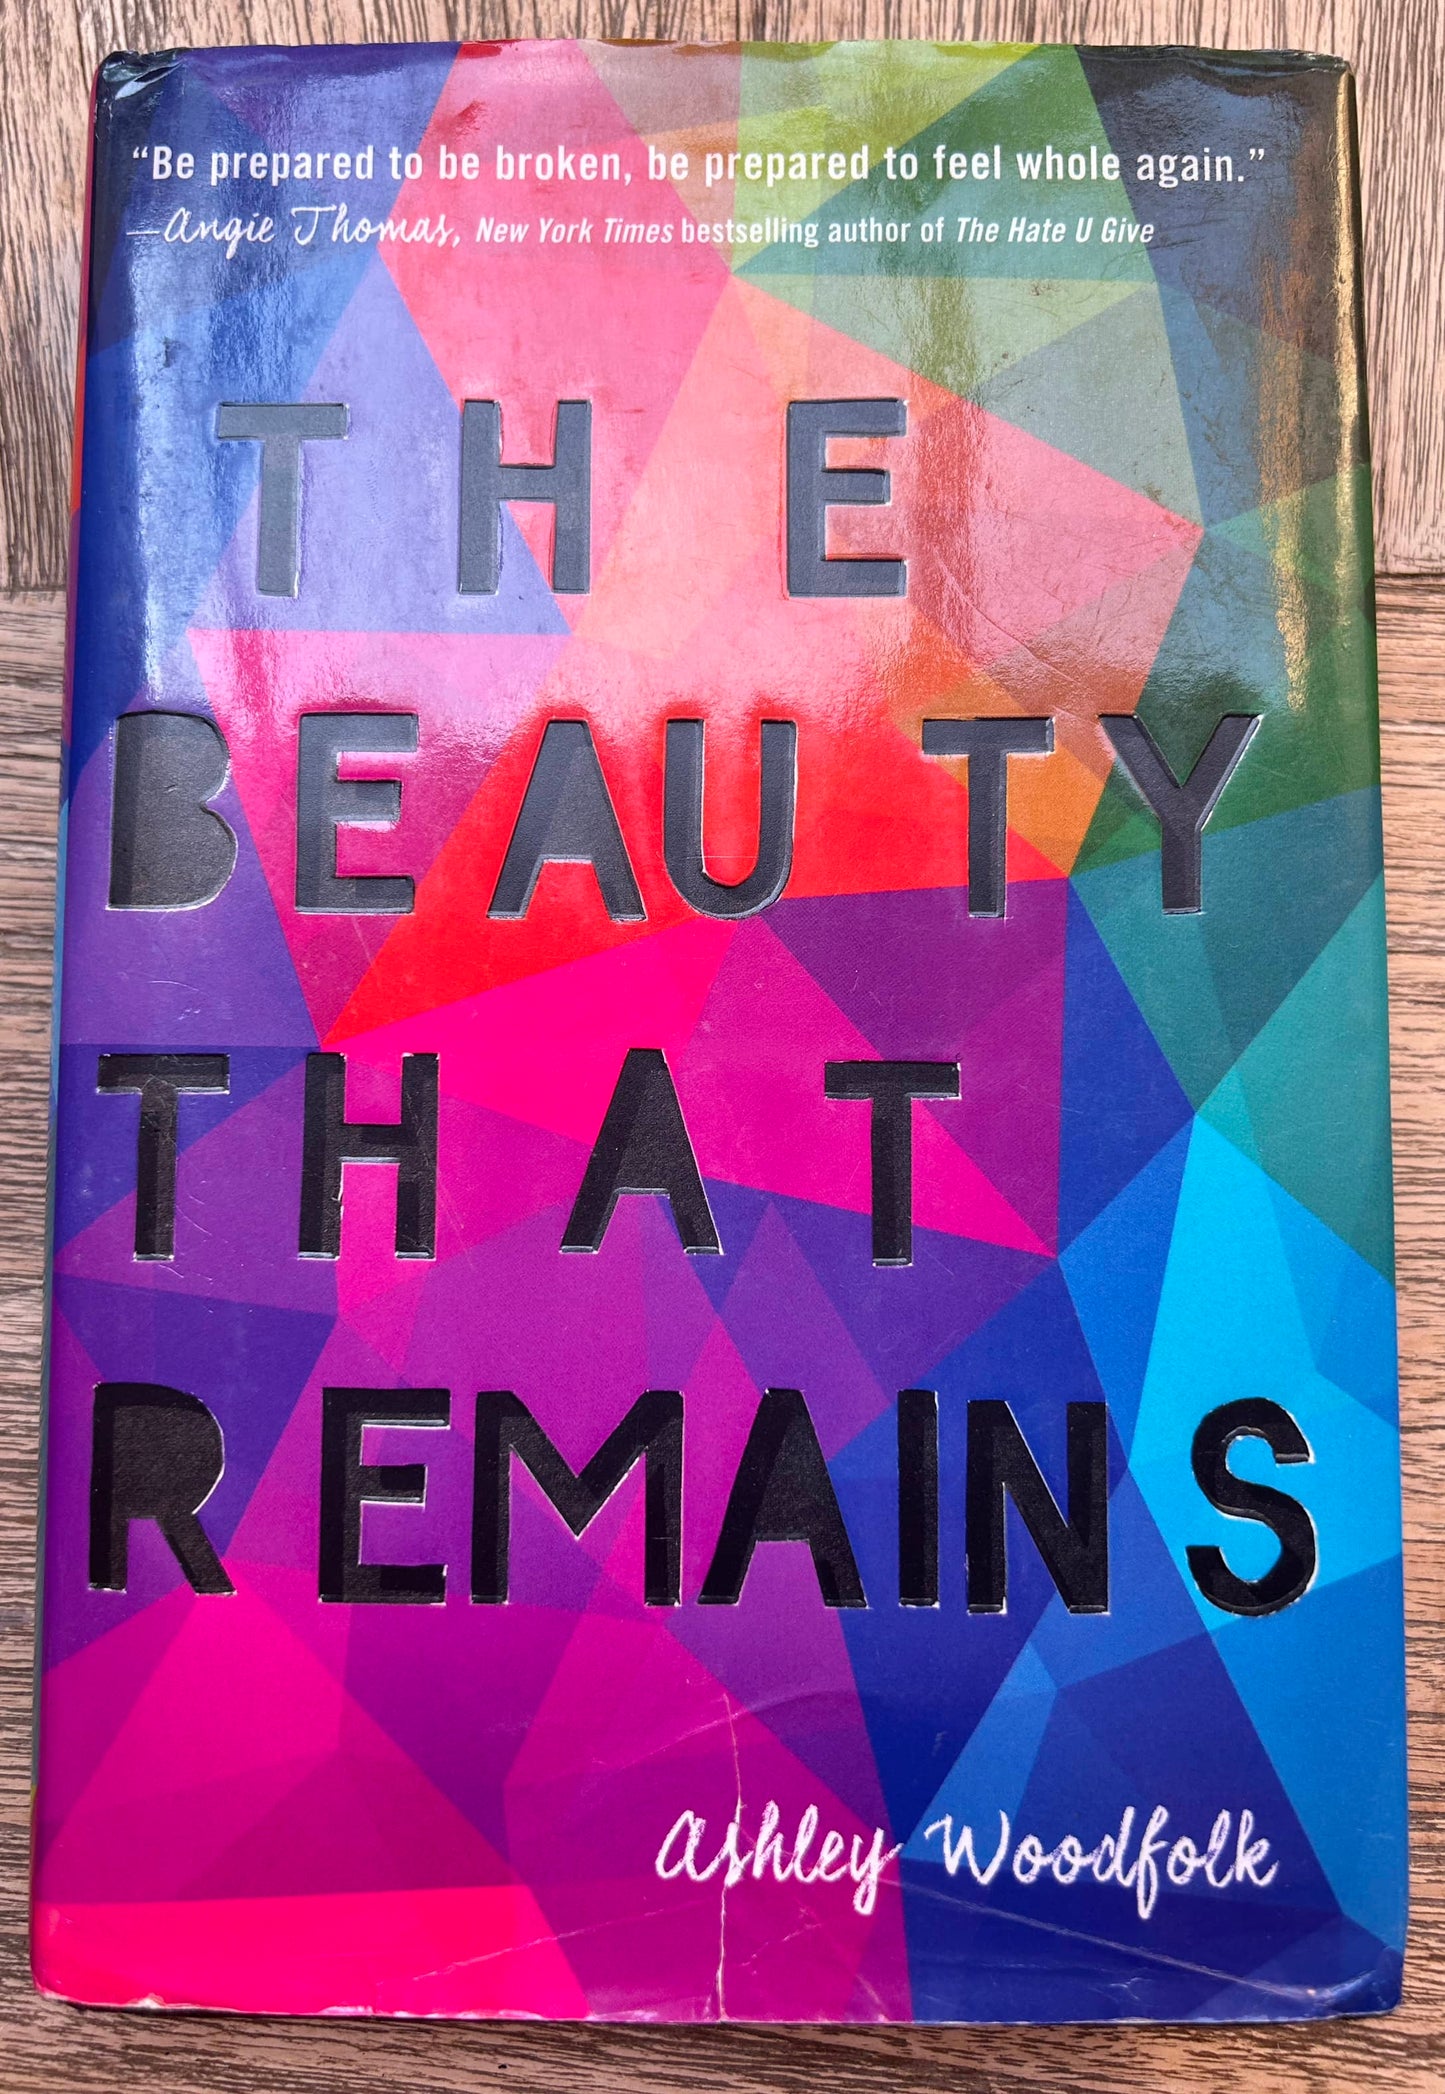 The Beauty that Remains - Ashley Woodfolk